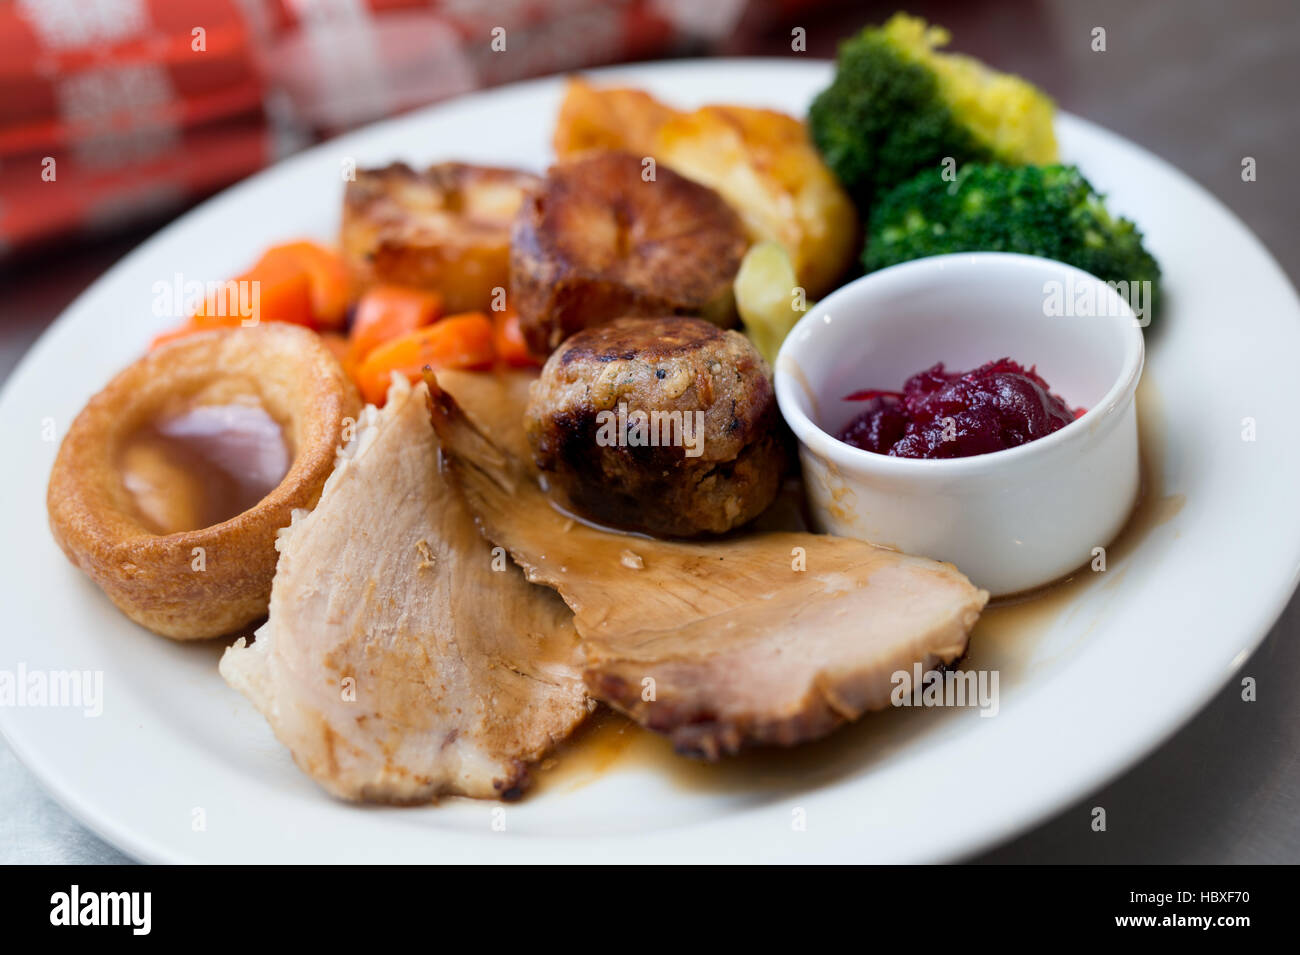 Roast dinner with christmas cracker in the background to reflect a christmas dinner Stock Photo